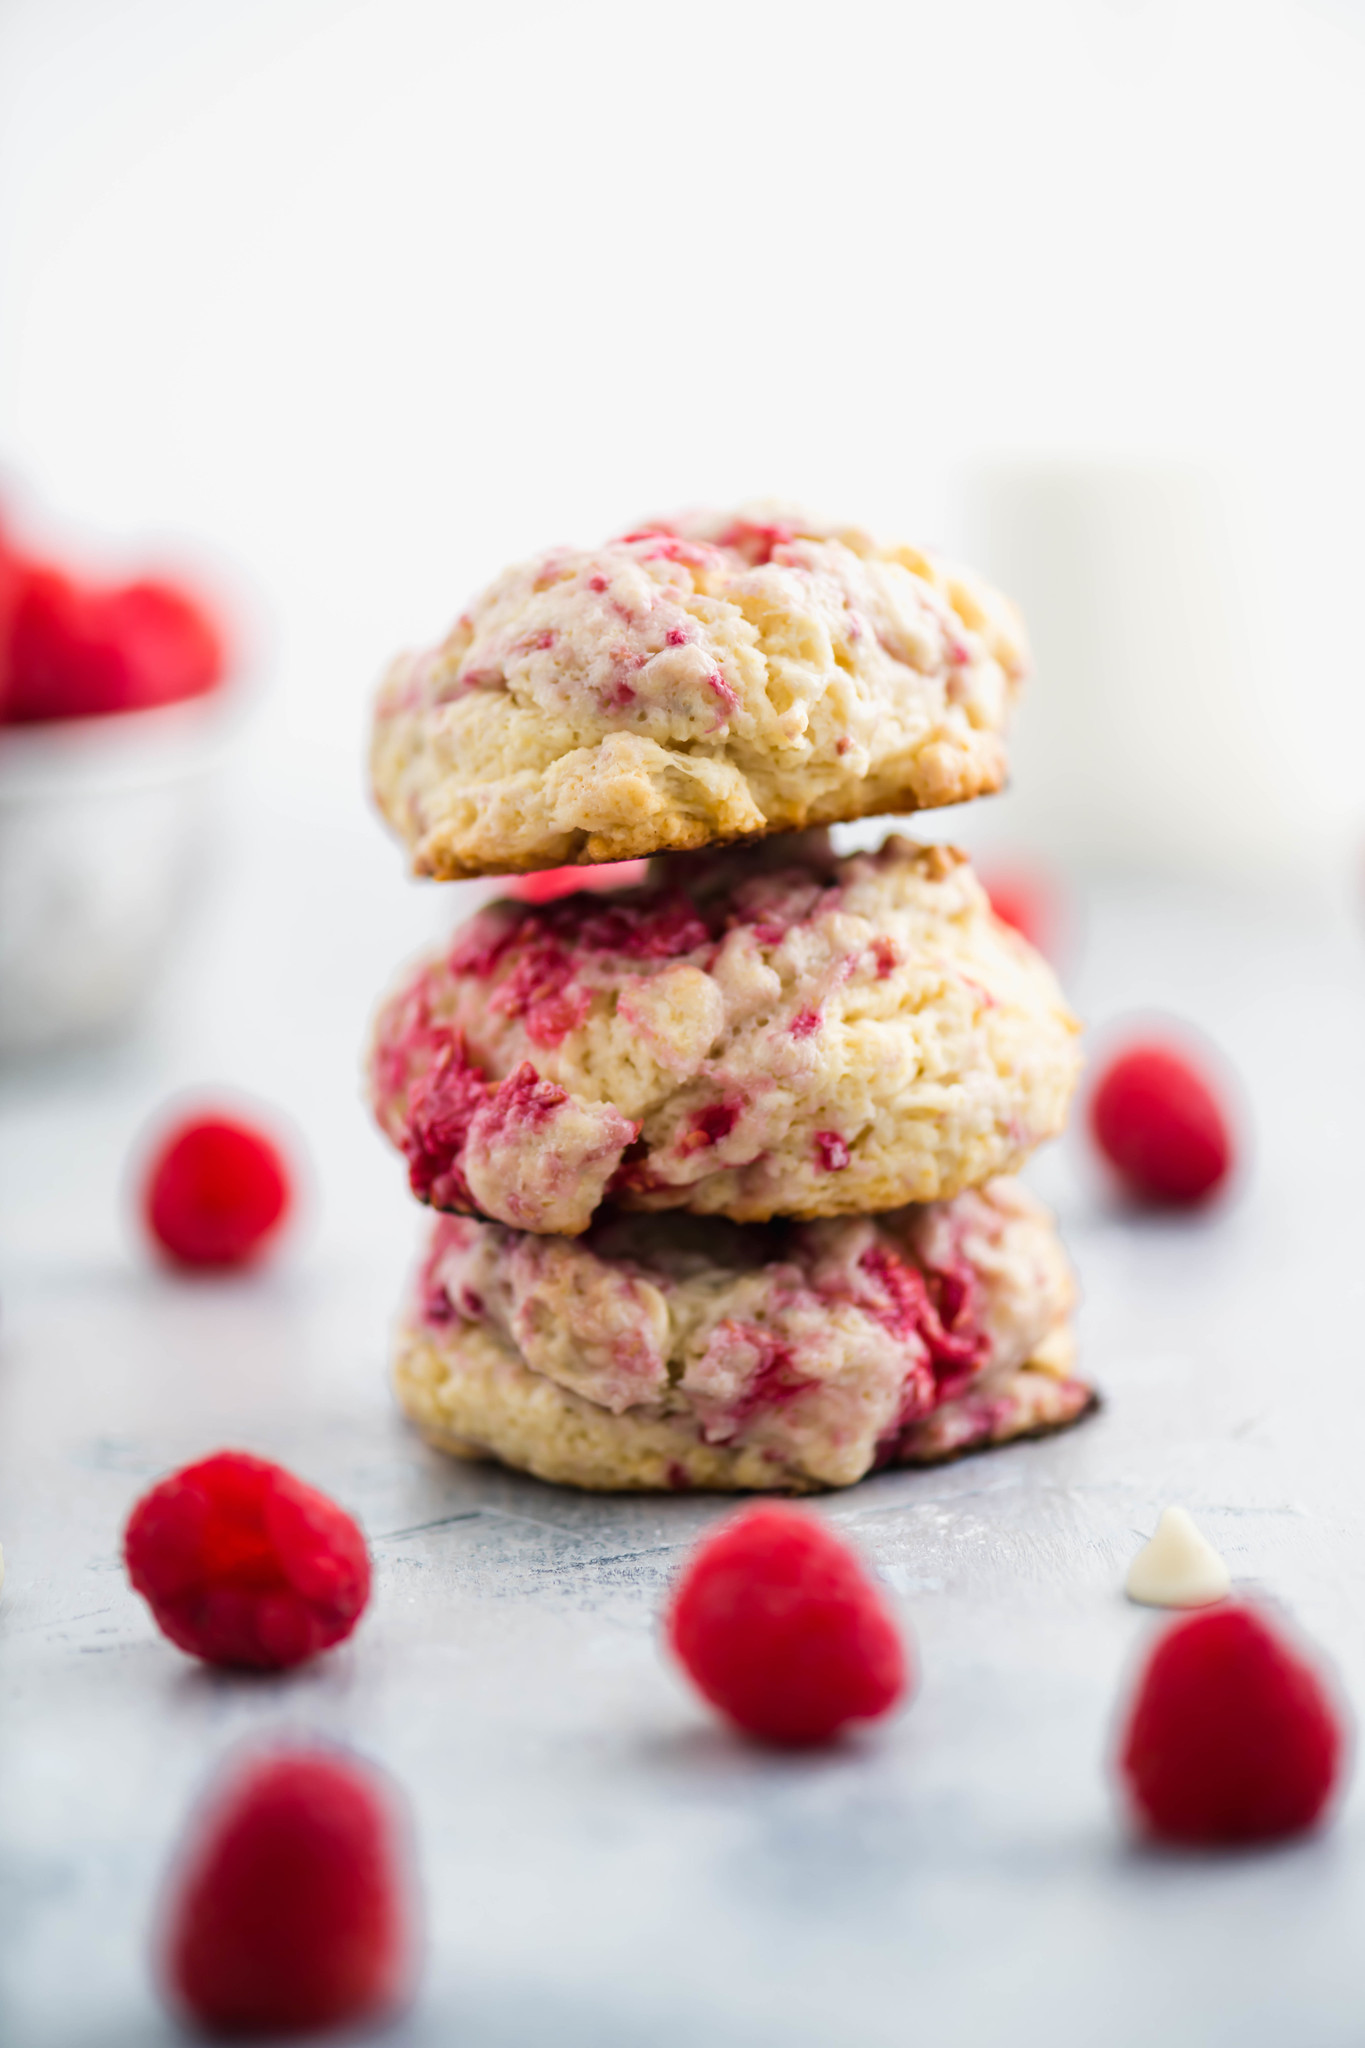 Three raspberry scones stacked on top of each other surrounded by fresh raspberries and white chocolate chips.